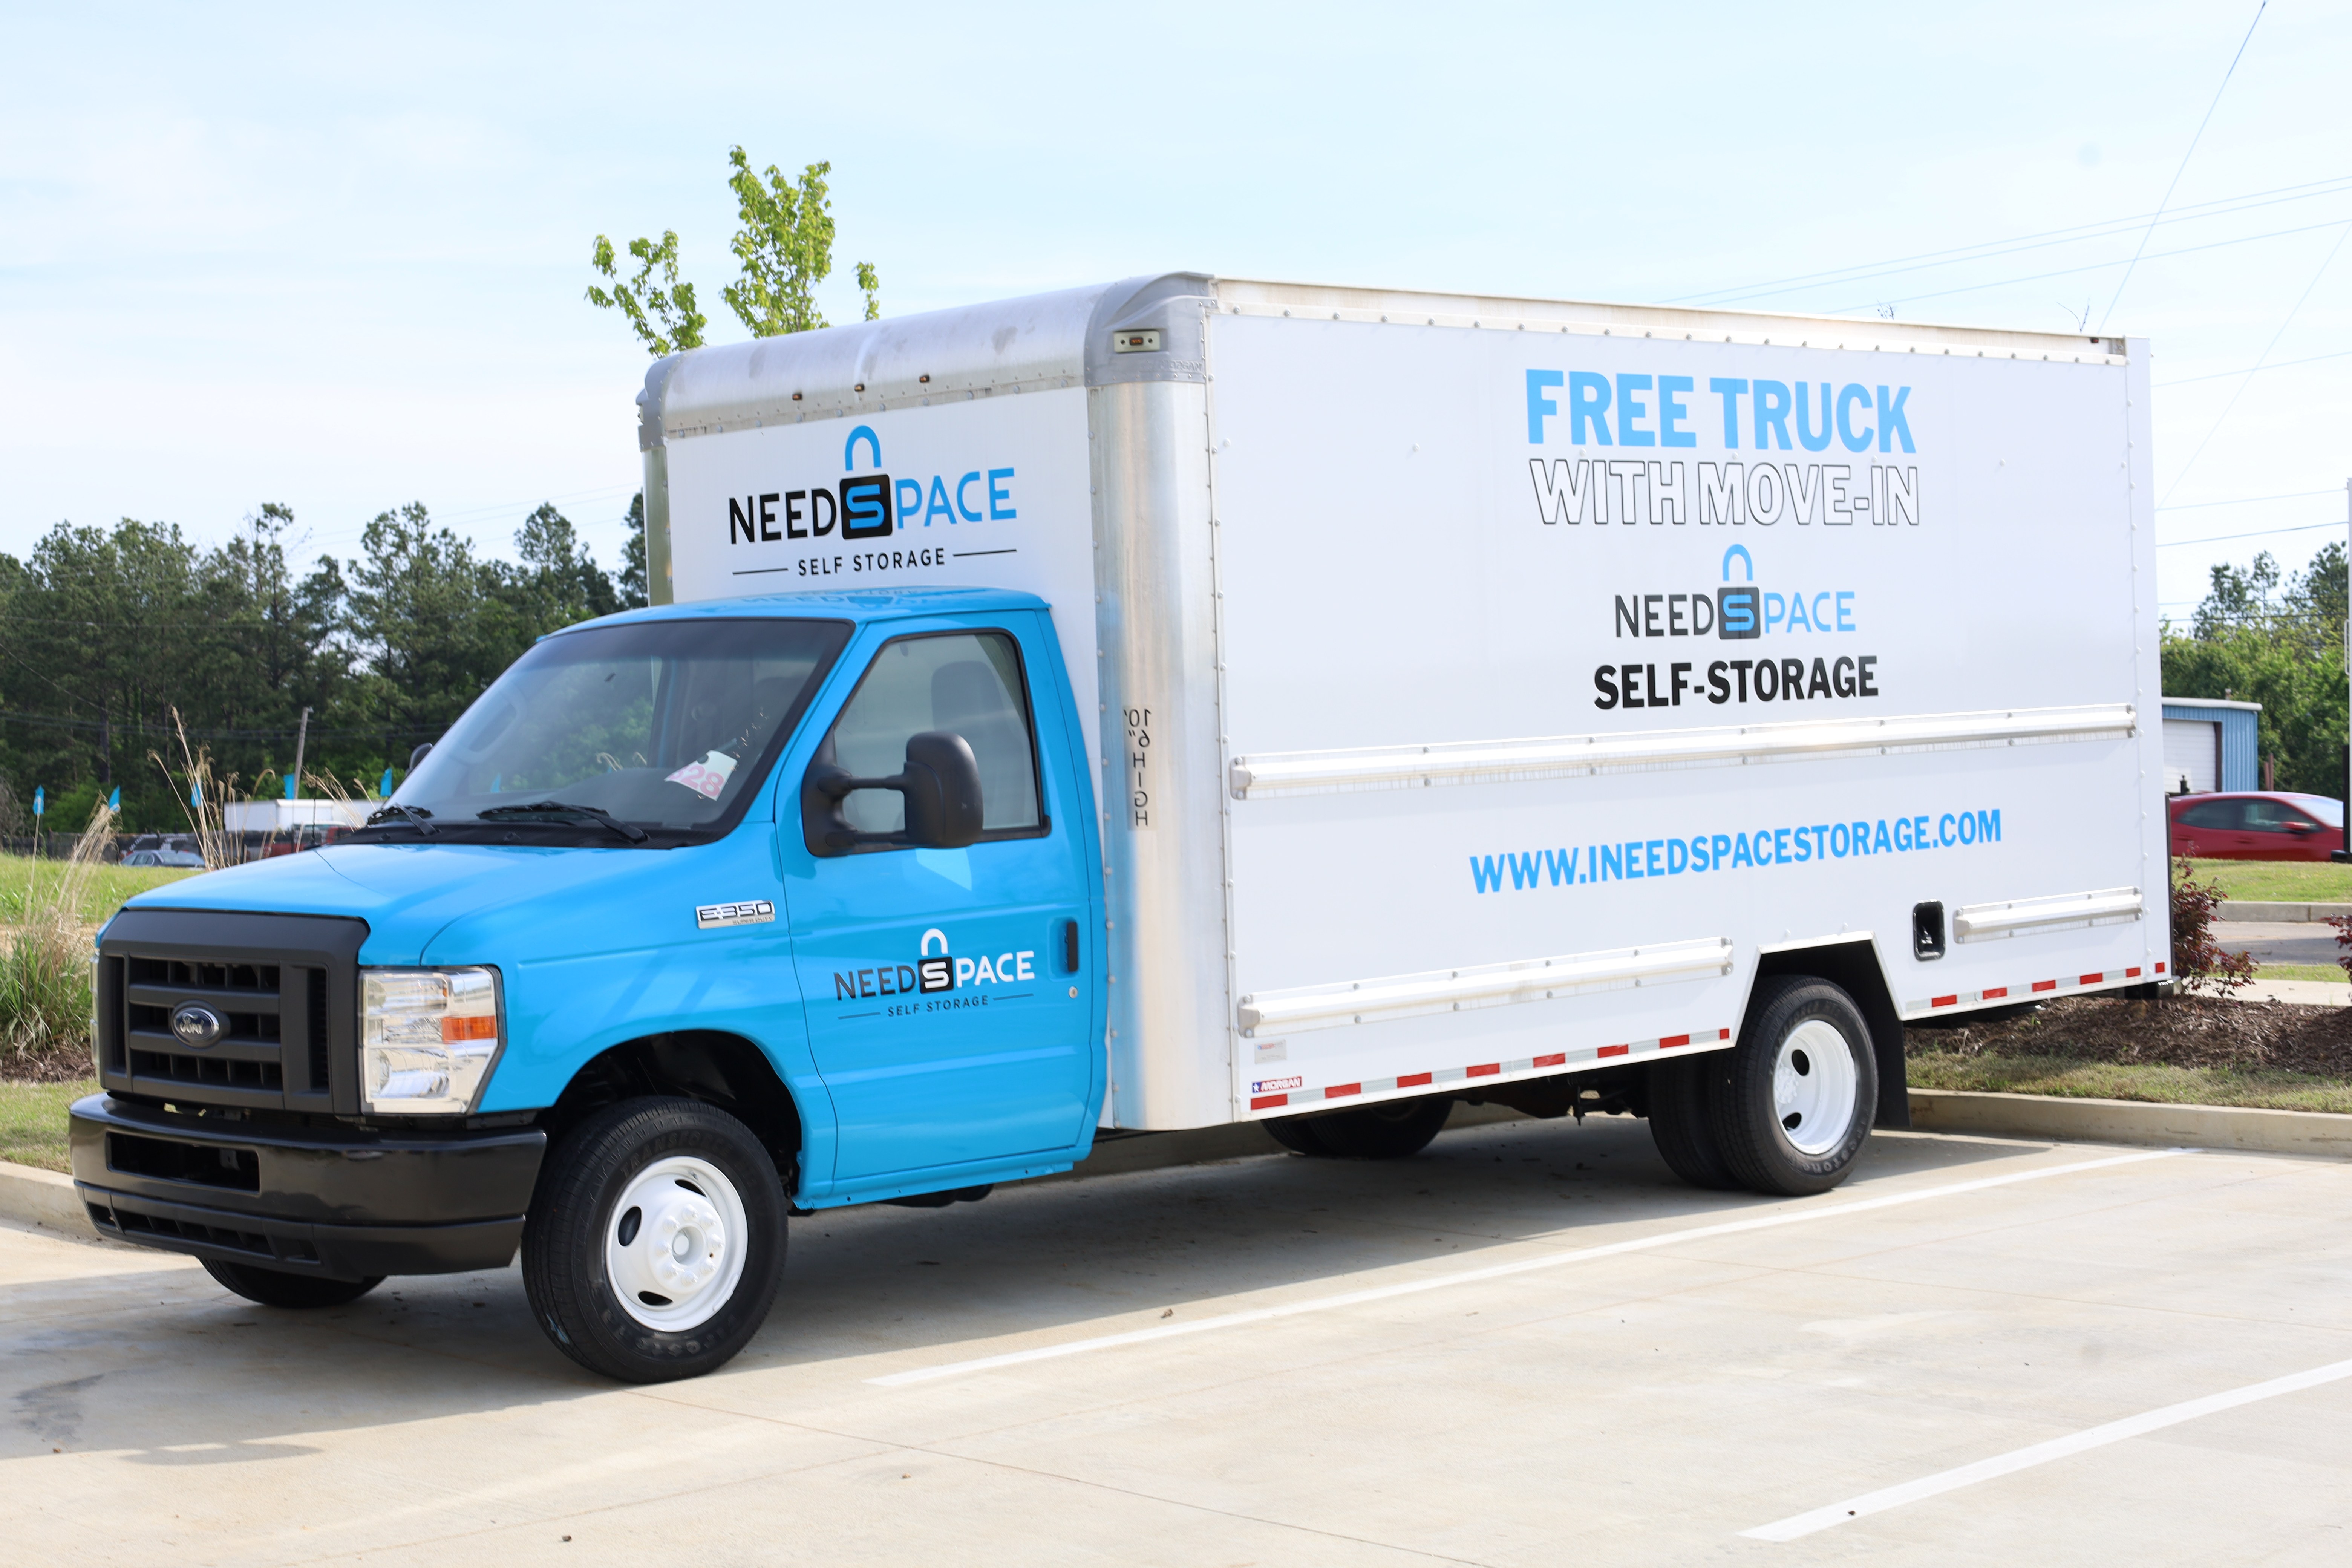 free box truck with move in